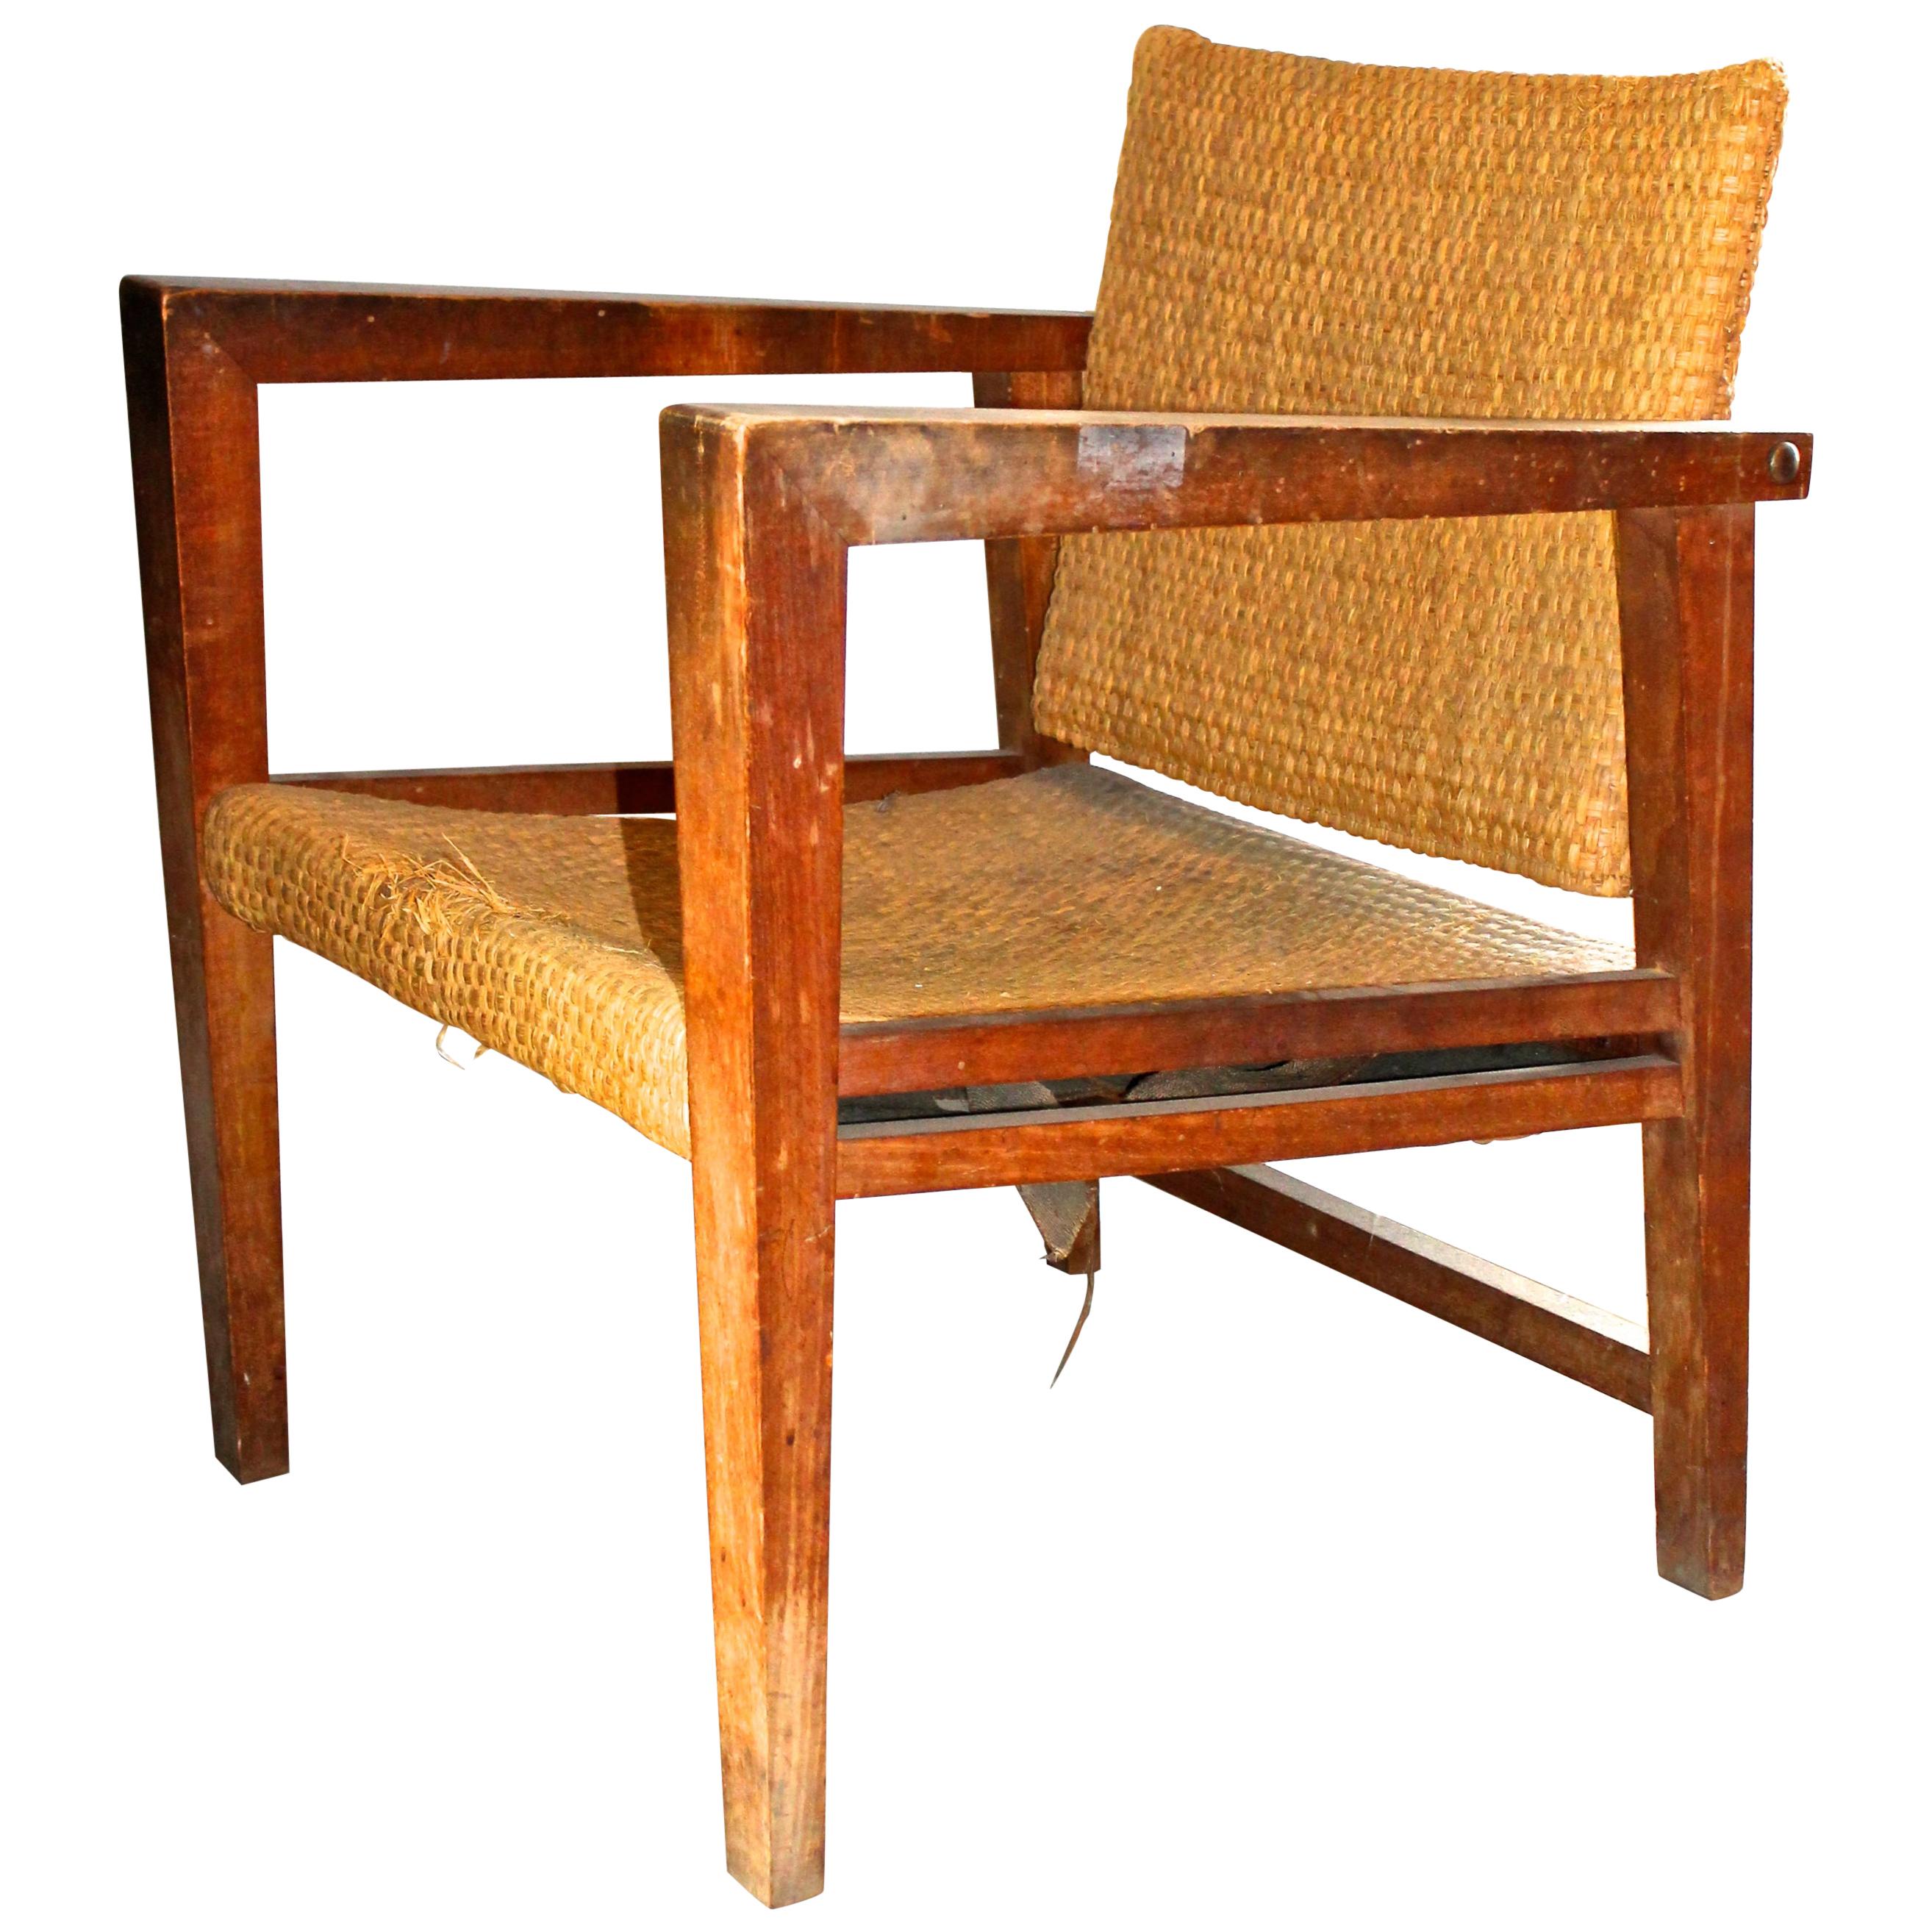 An important chair in woven straw, most likely constructed of sycamore. Back swings and connects in 'Basculant' manner.